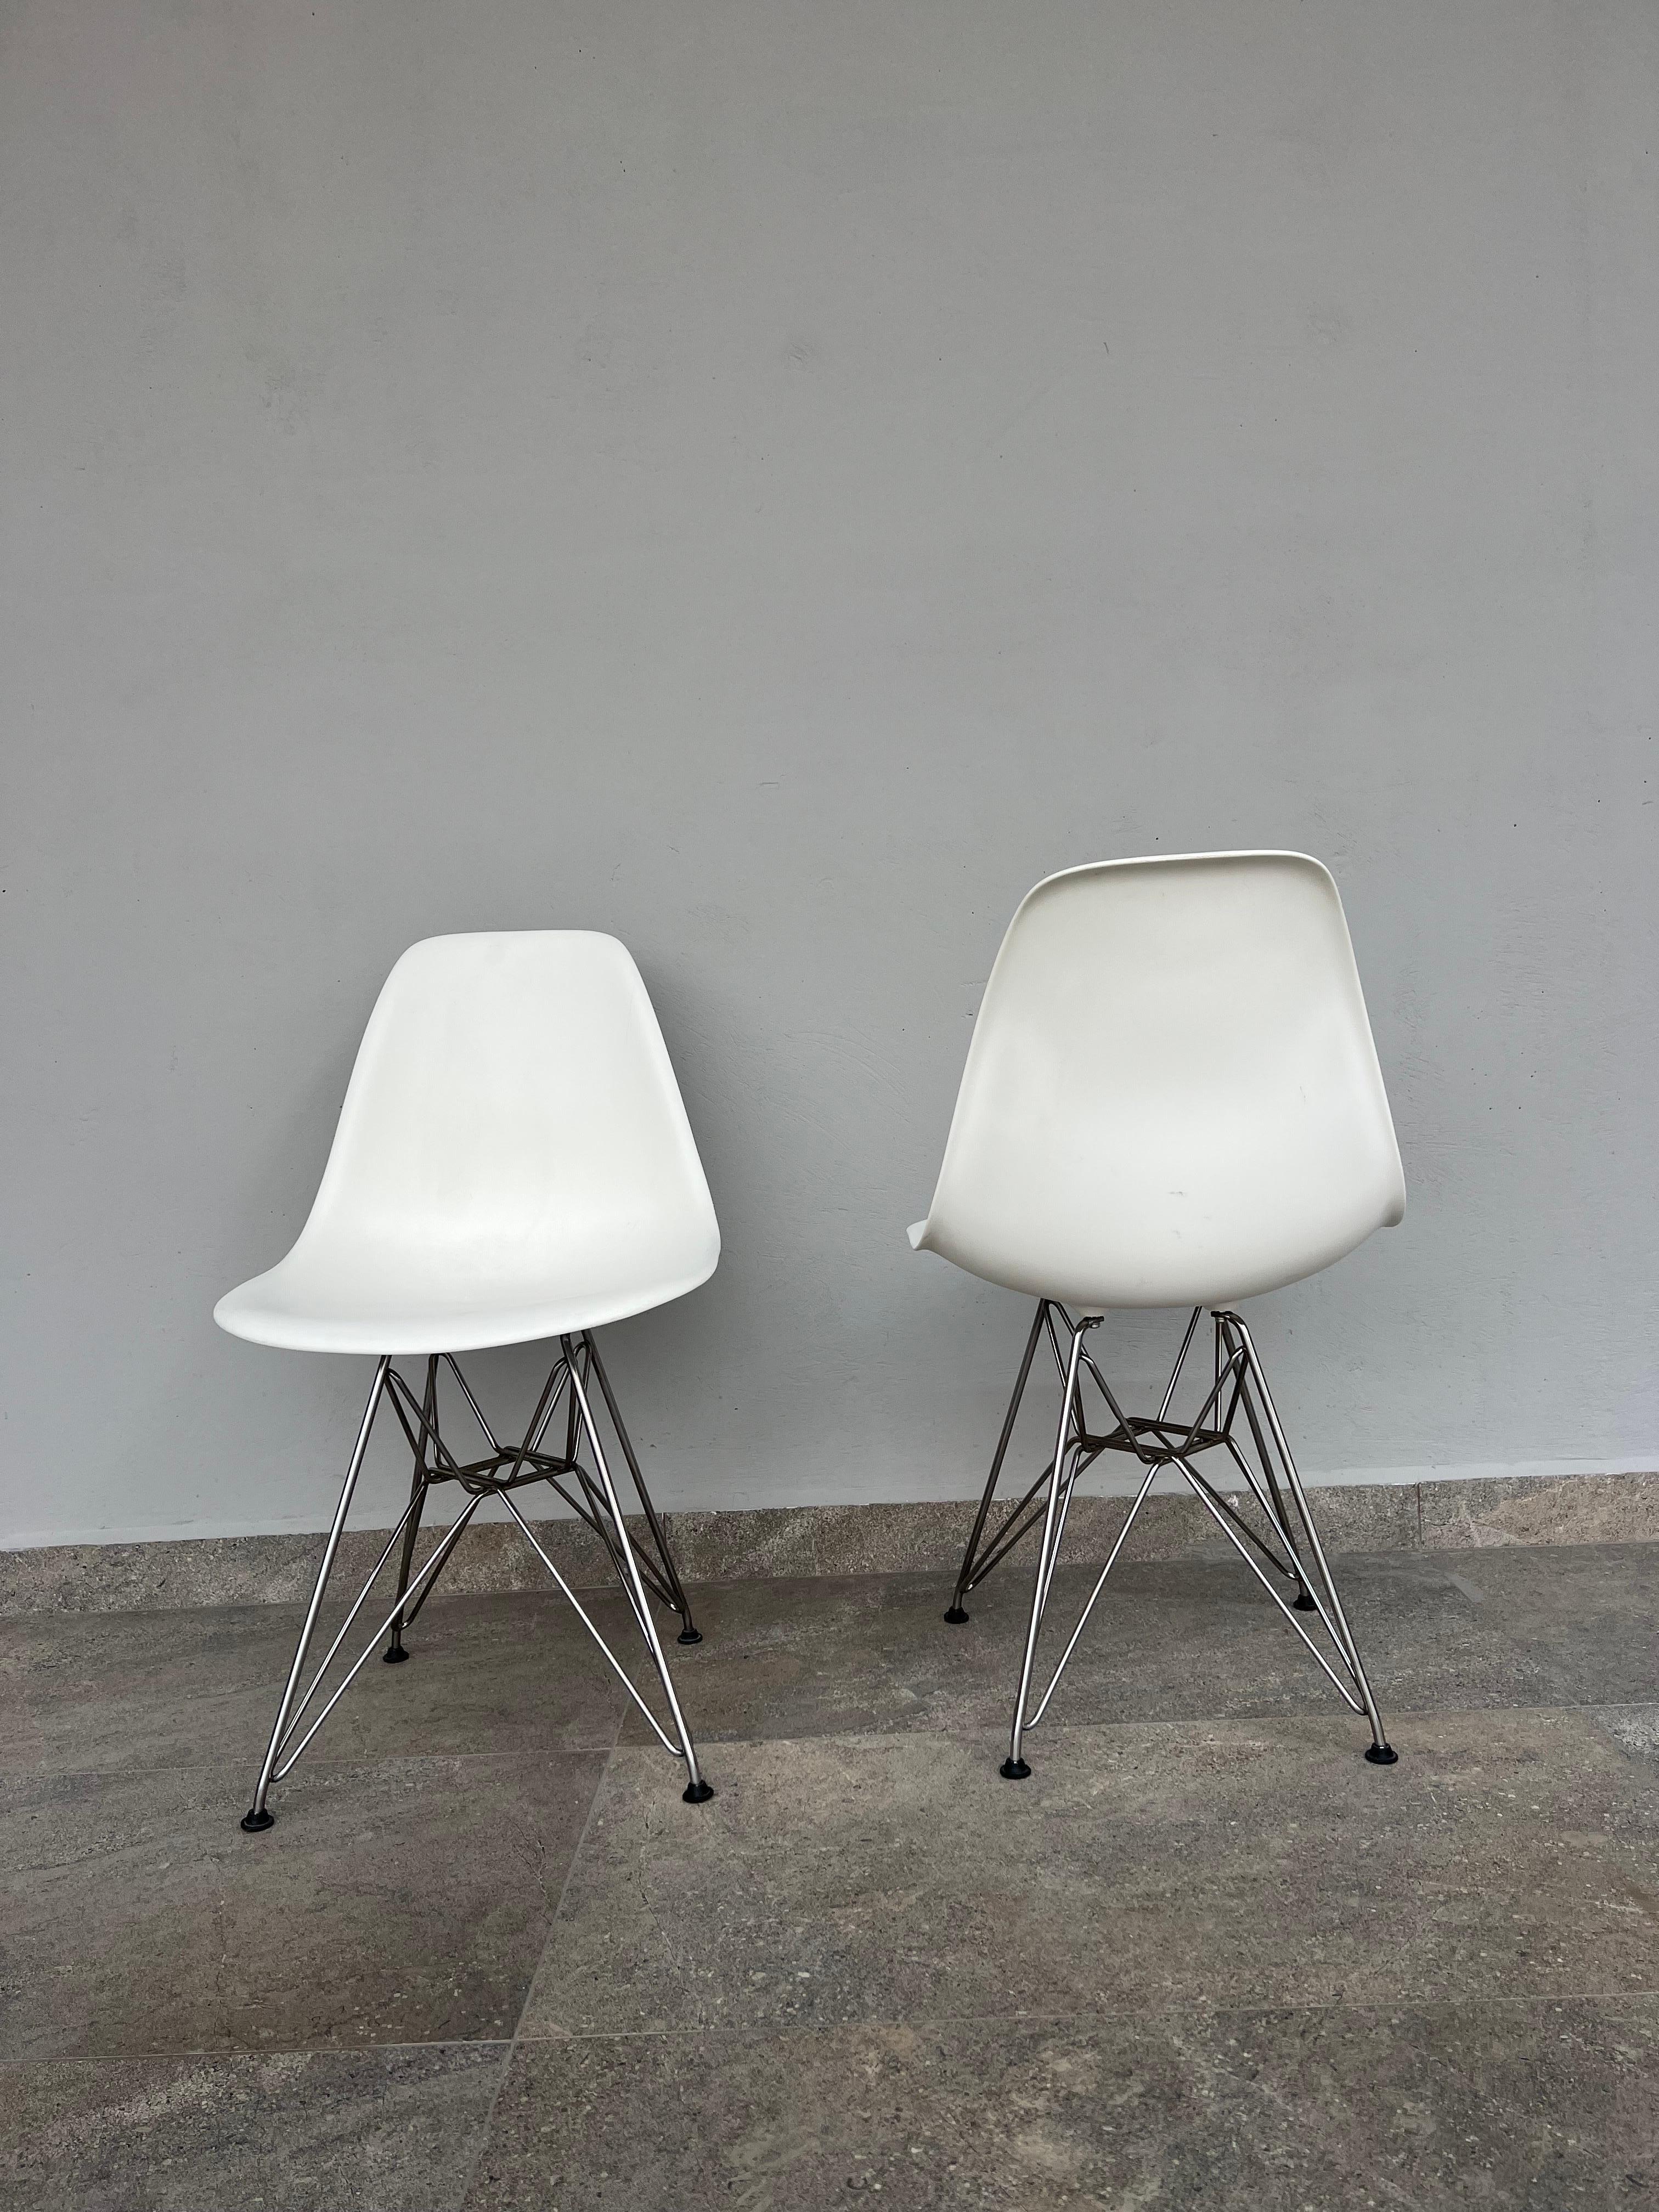 Pair of Eames Molded White Plastic Chairs with Eiffel Tower Bases For Sale 1